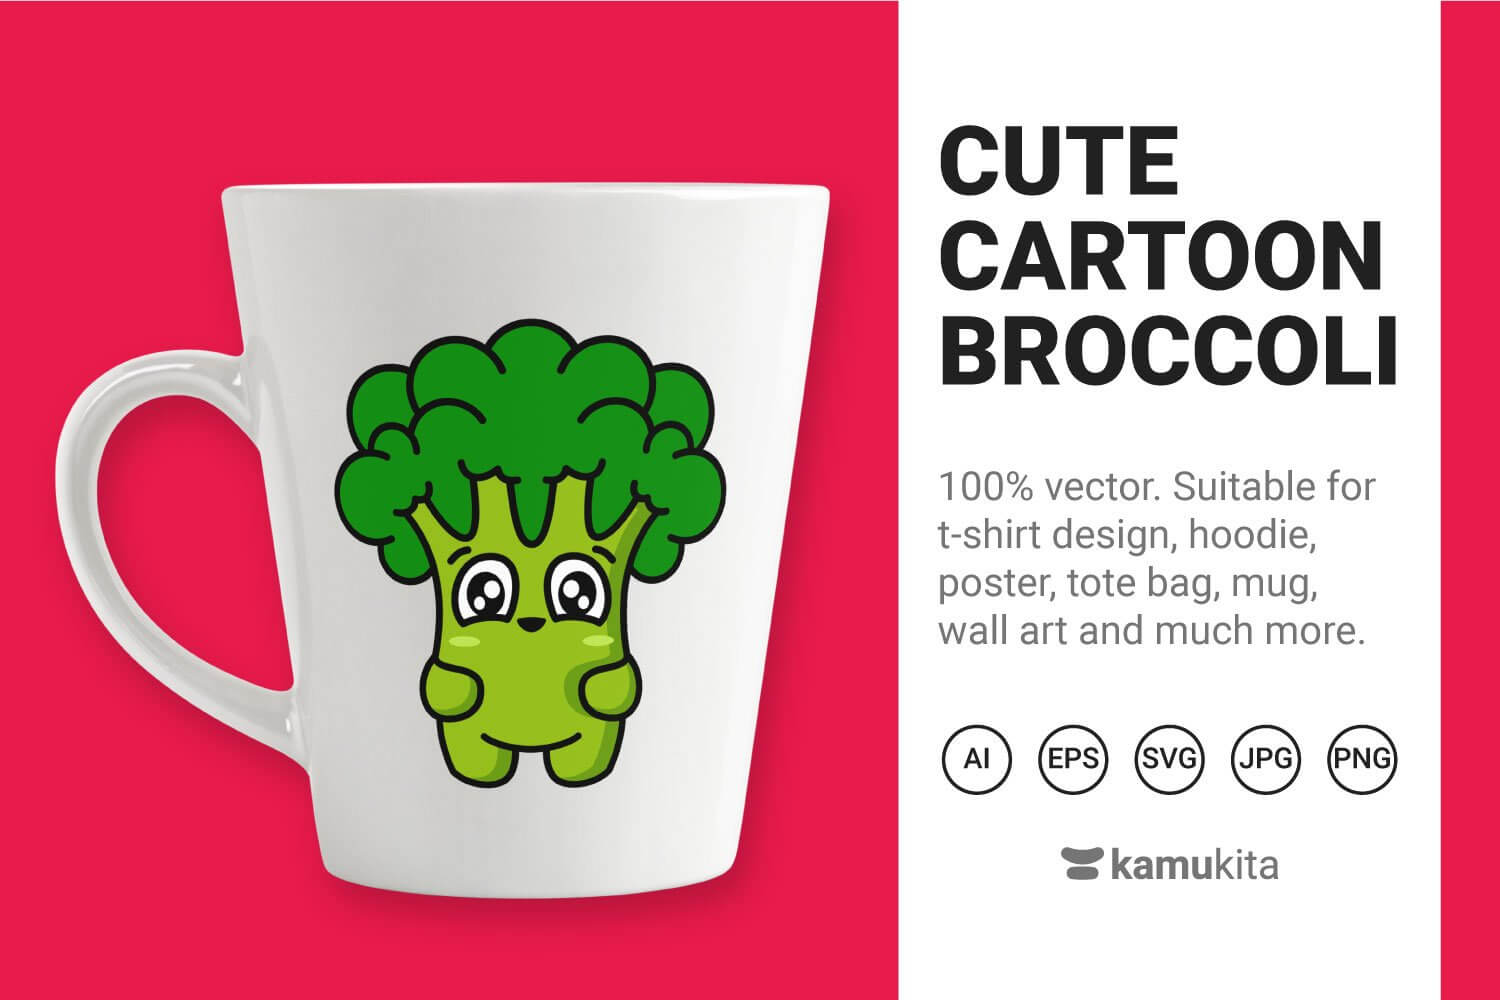 On a pink background is a white cup with a picture of green cute broccoli.